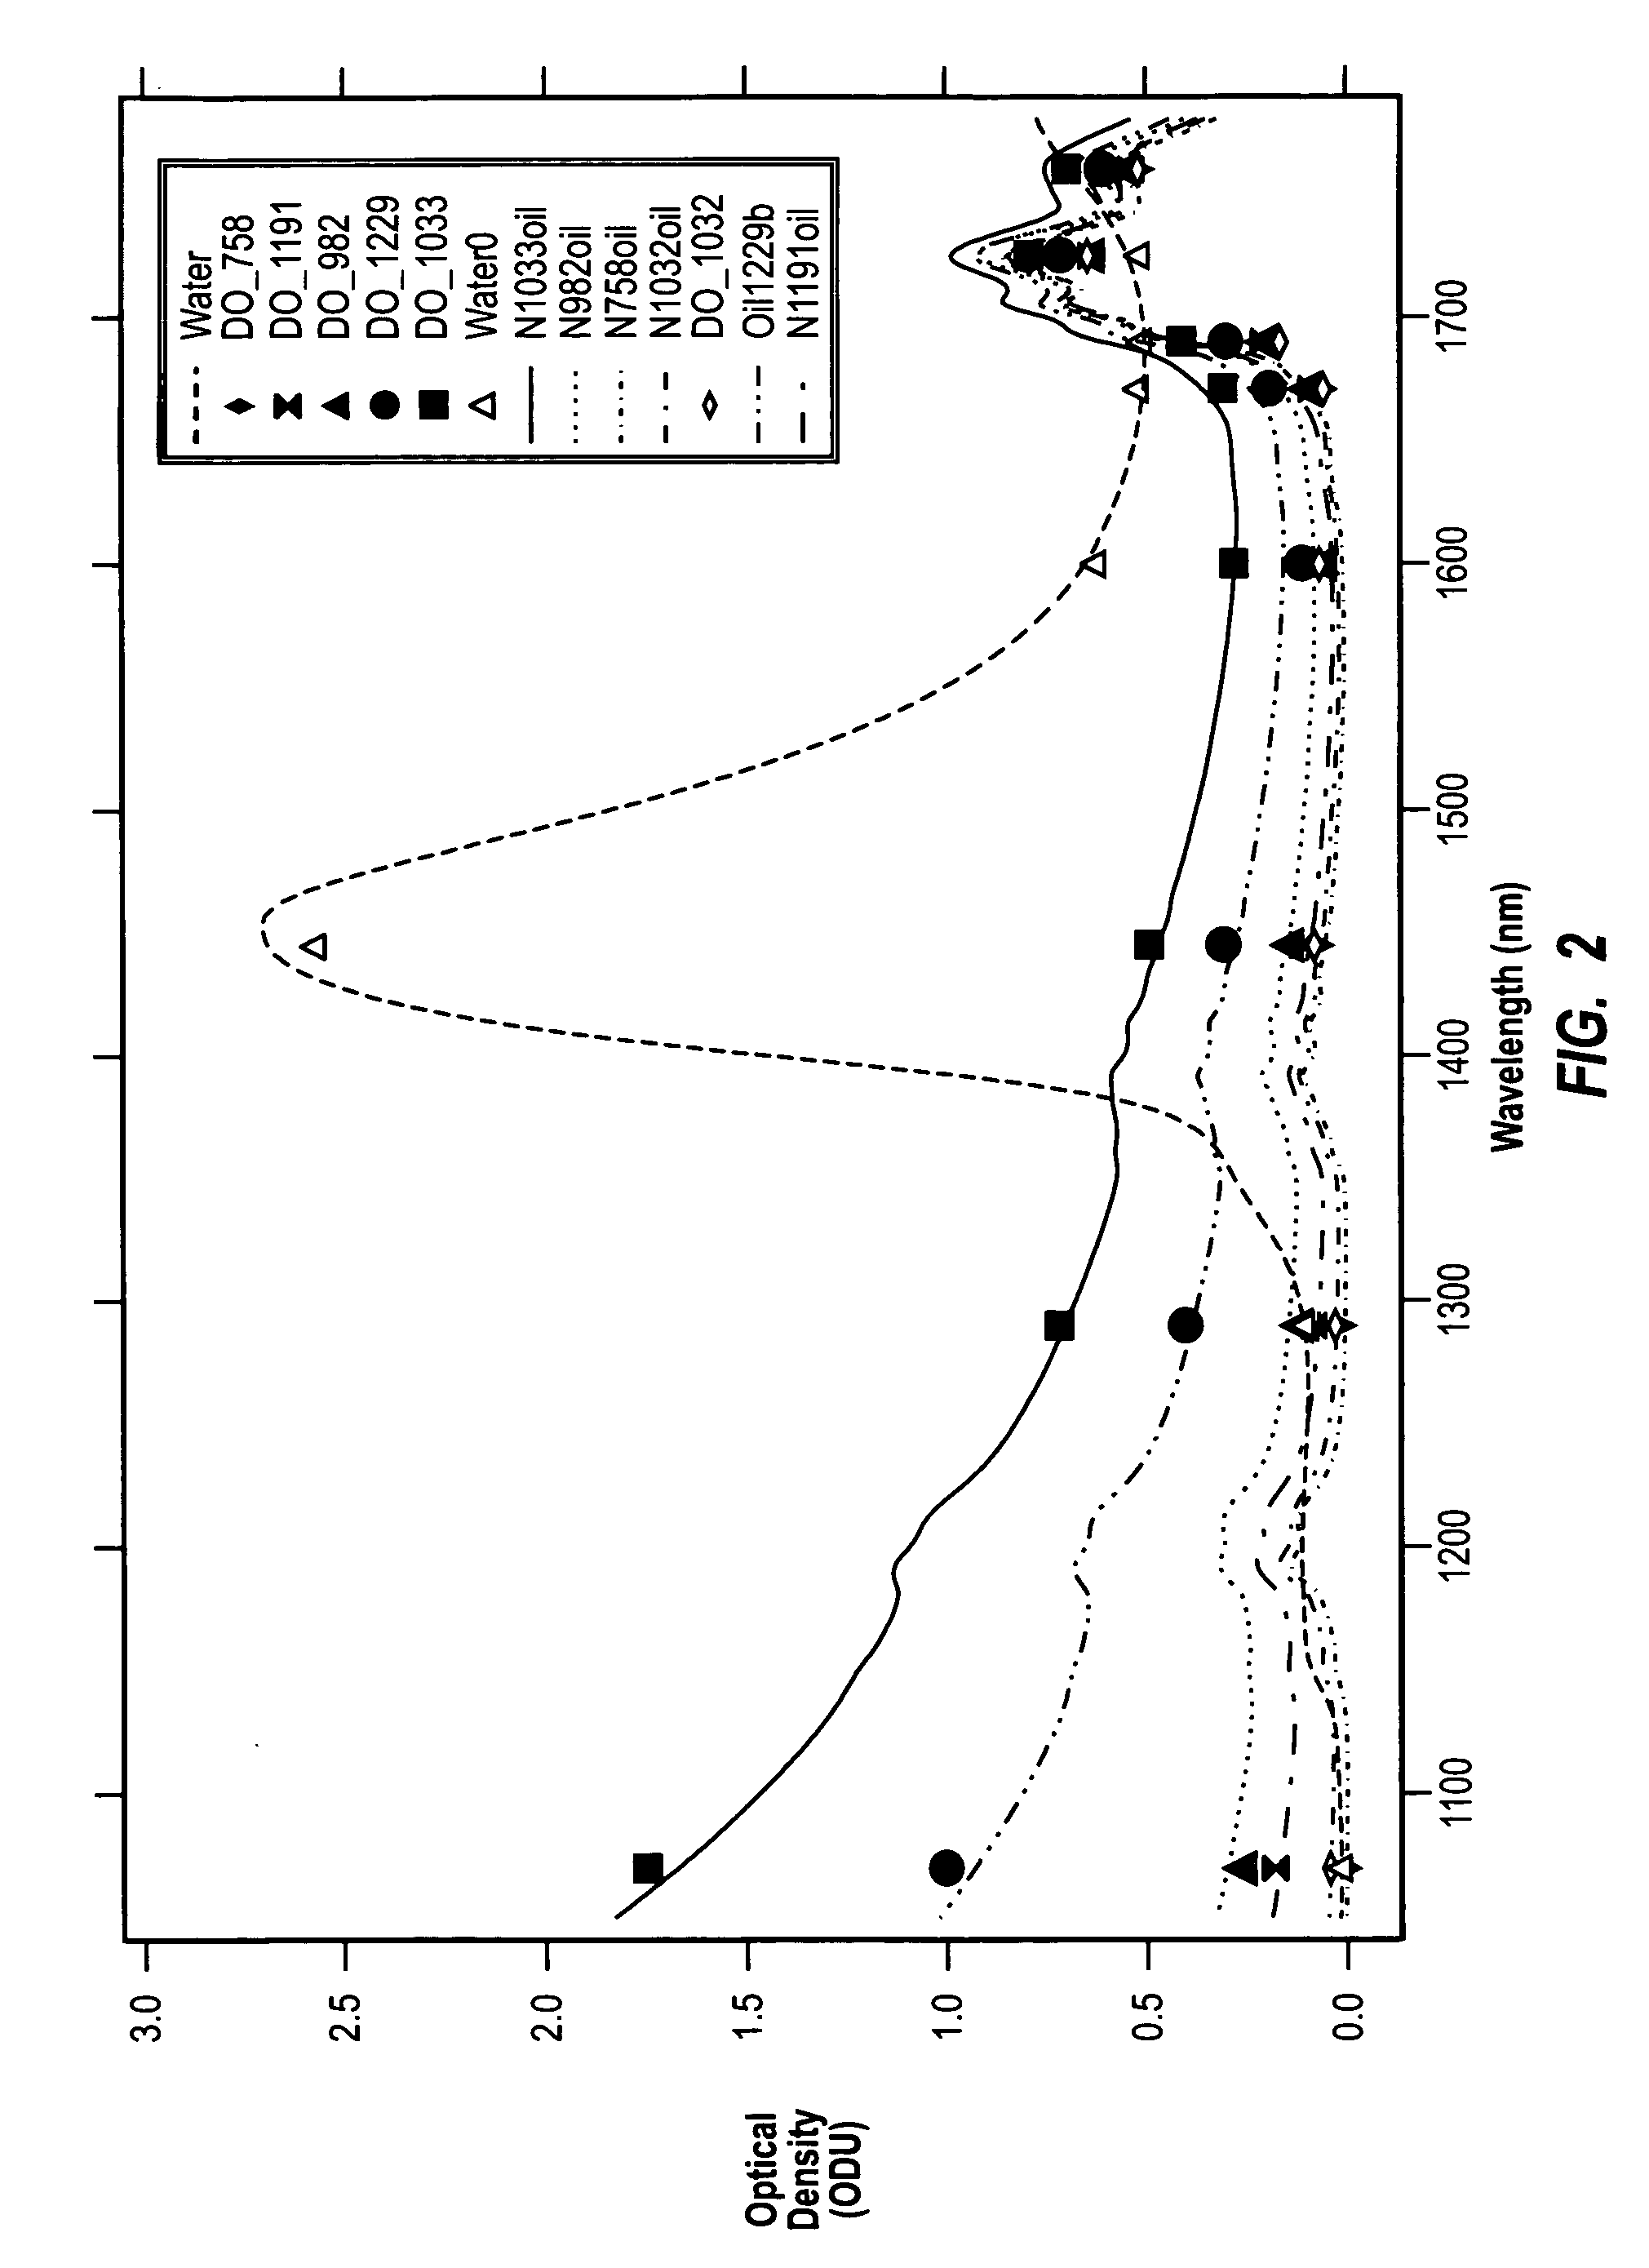 Method and apparatus for composition analysis in a production logging environment